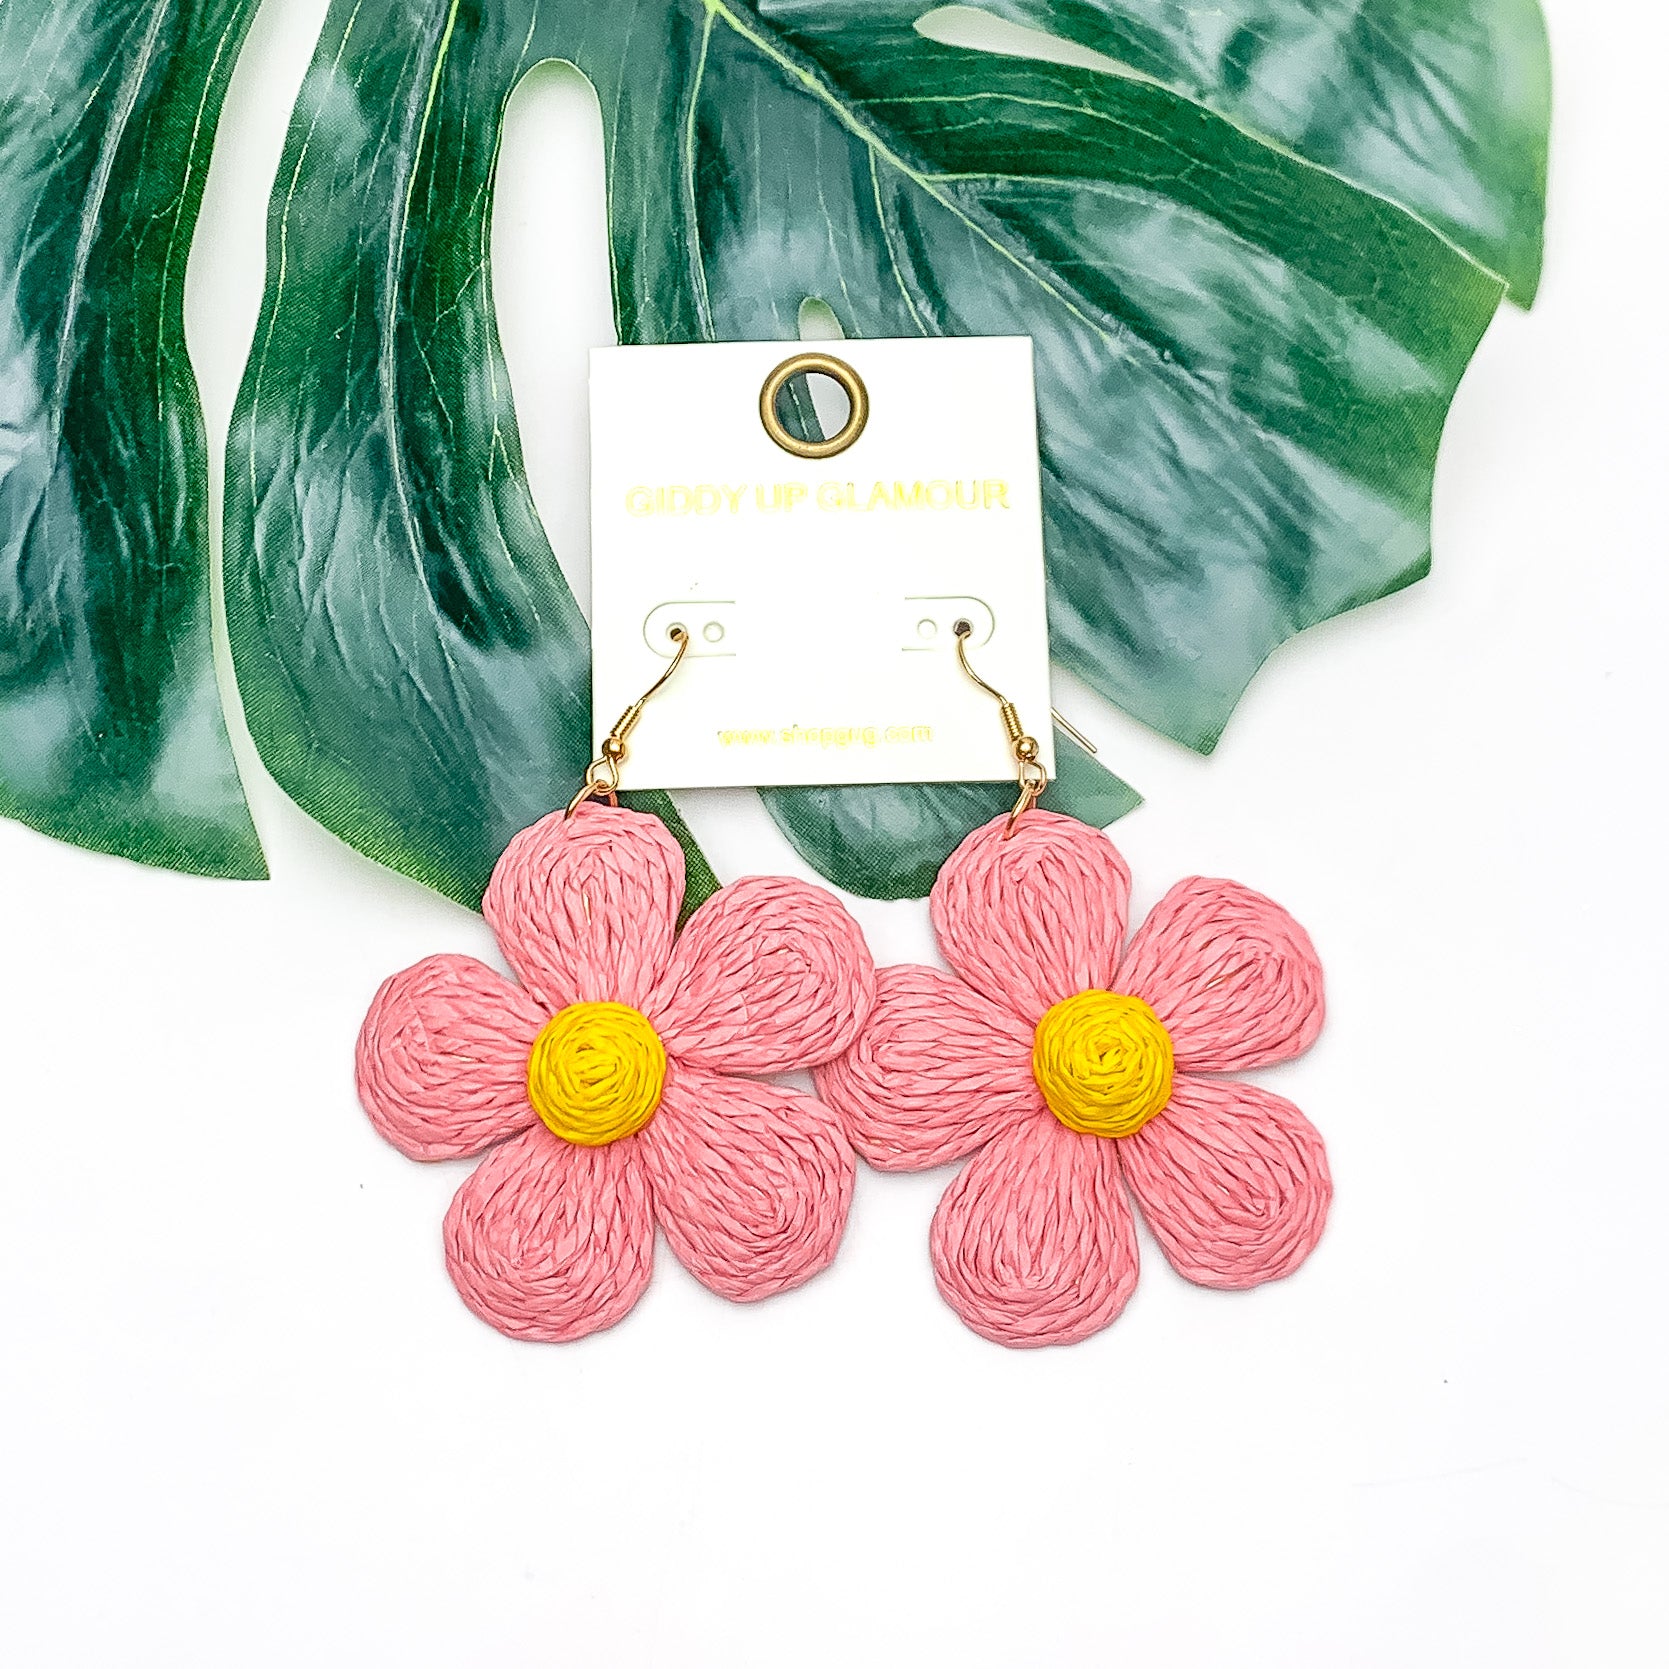 Darling Daisy Raffia Wrapped Flower Earrings in Purple. Pictured on a white background with the earrings laying on a large leaf.